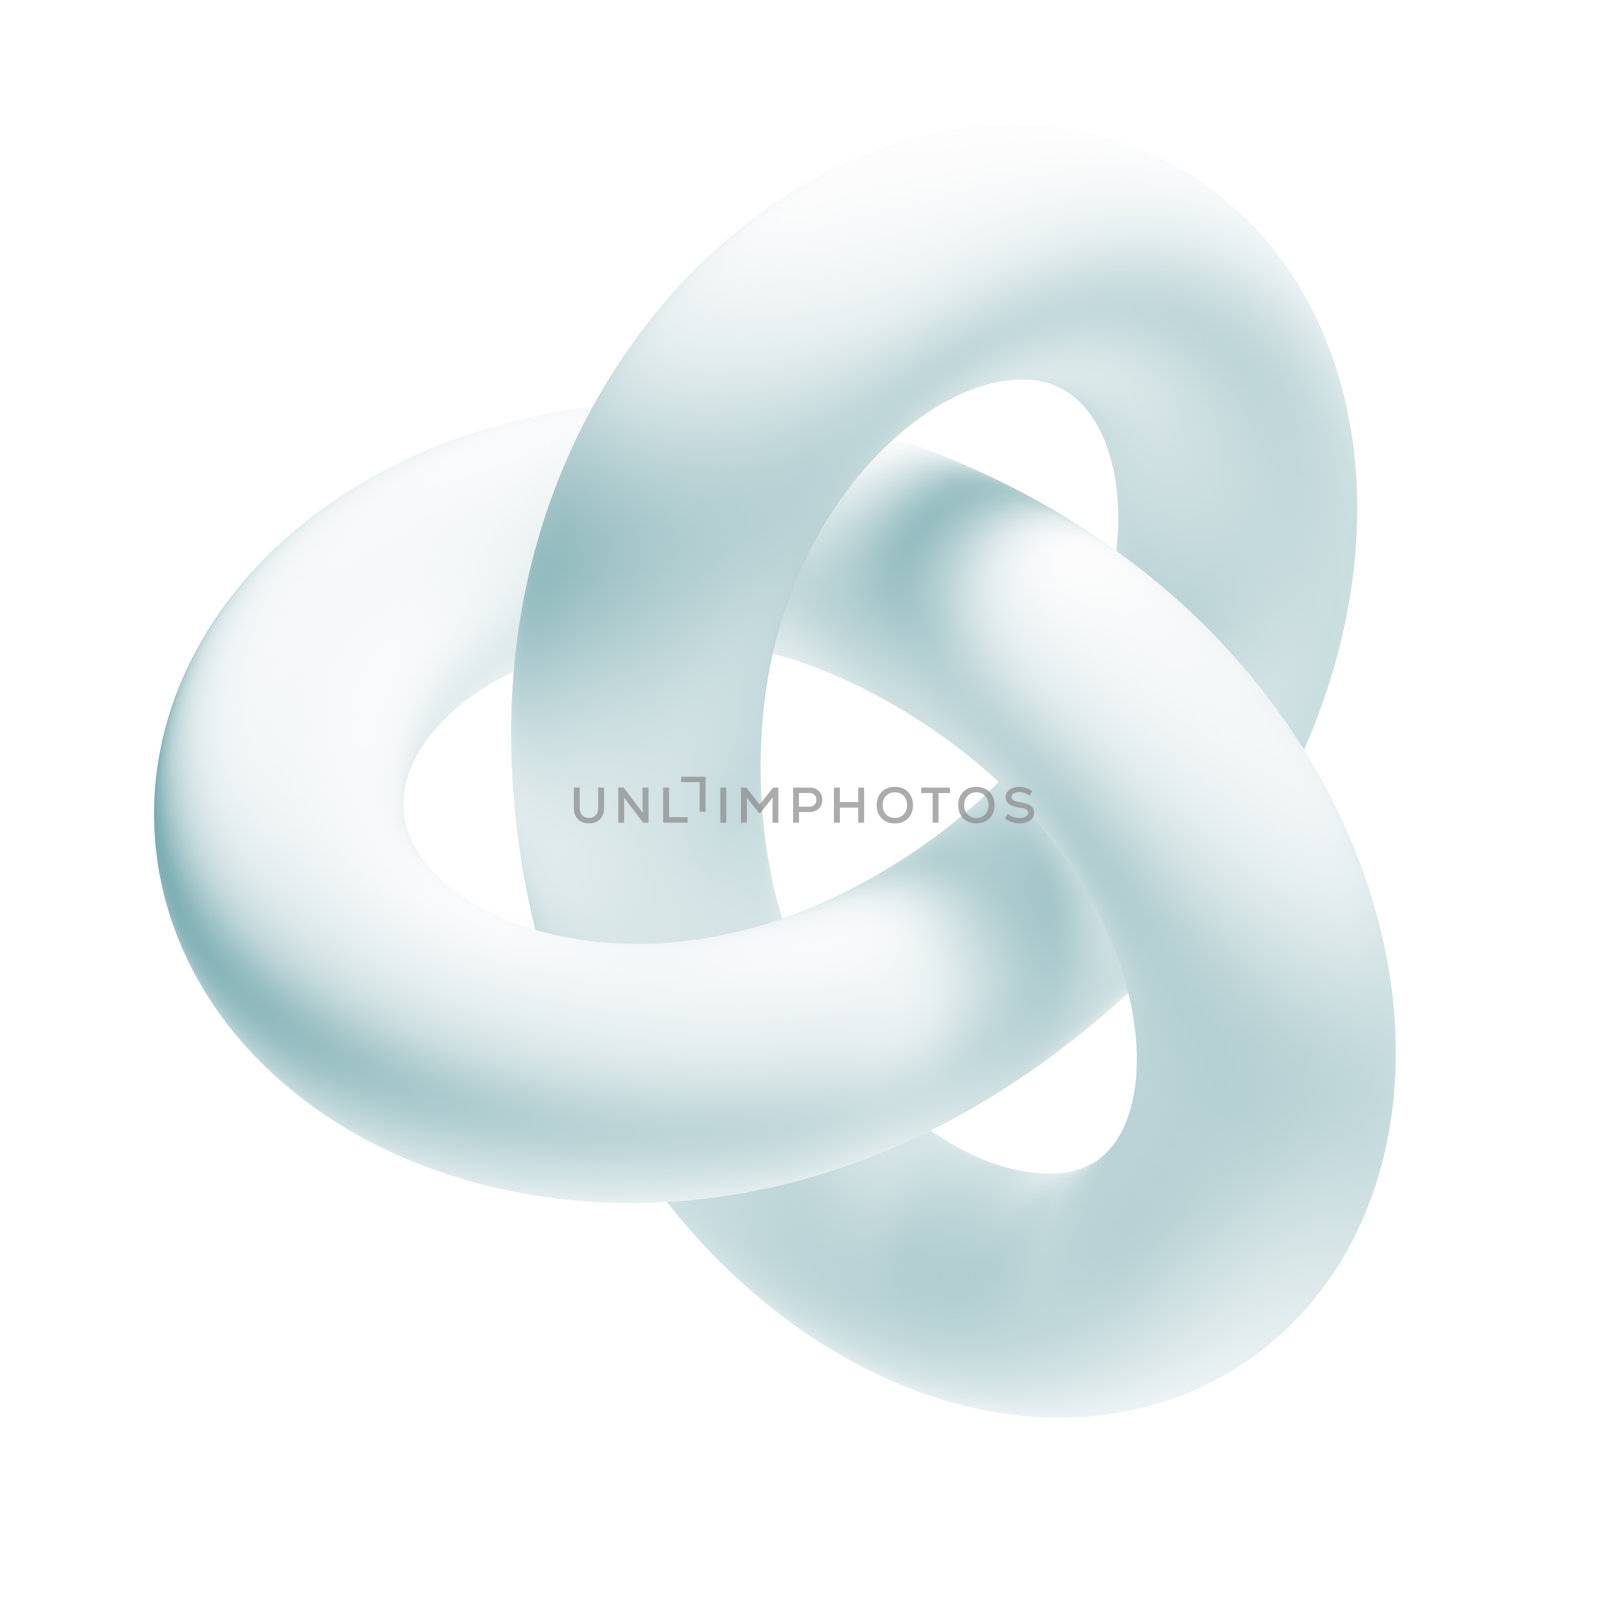 Blue Abstract Shape Isolated on White Background